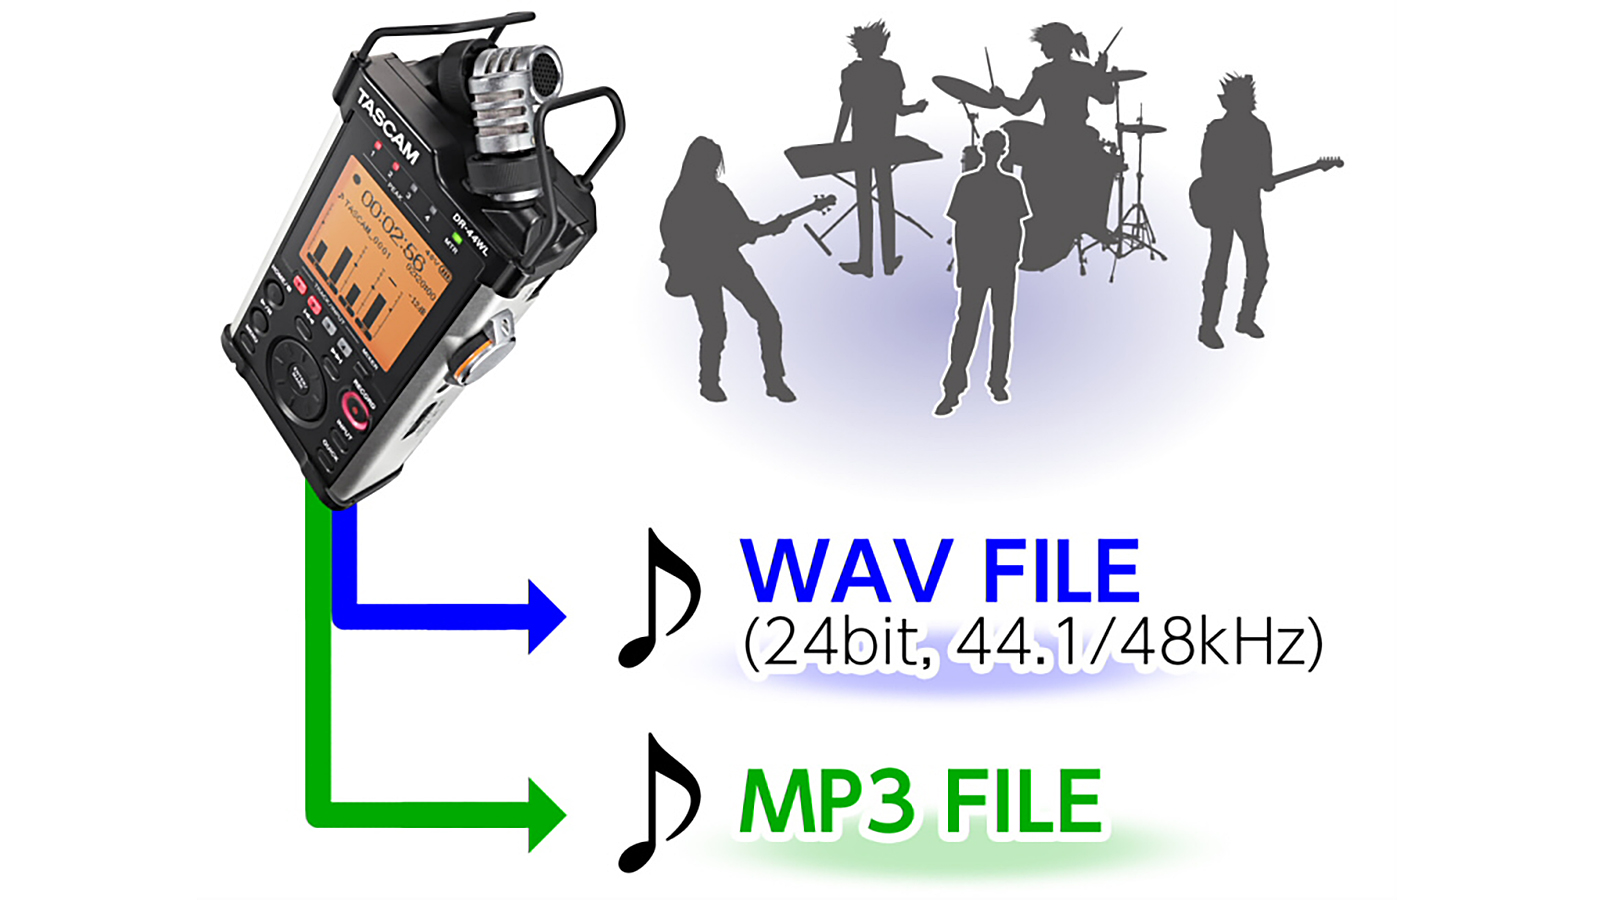 Dual-Format Recording Function Records both WAV and MP3 Files